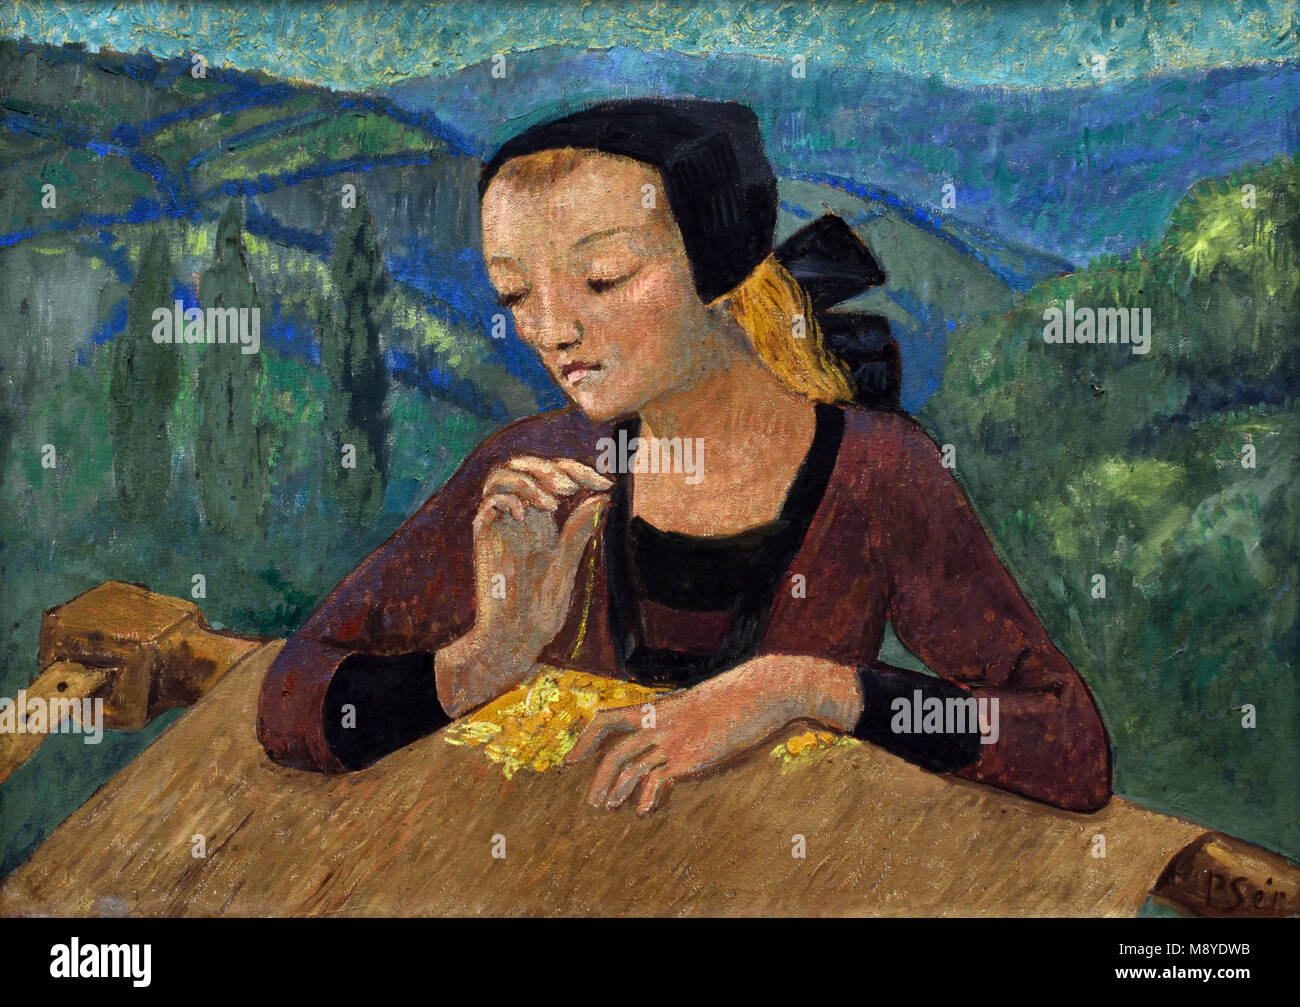 La Brodeuse - The Embroiderer 1925 Paul Serusier ,1863-1927 , France, French. Stock Photo